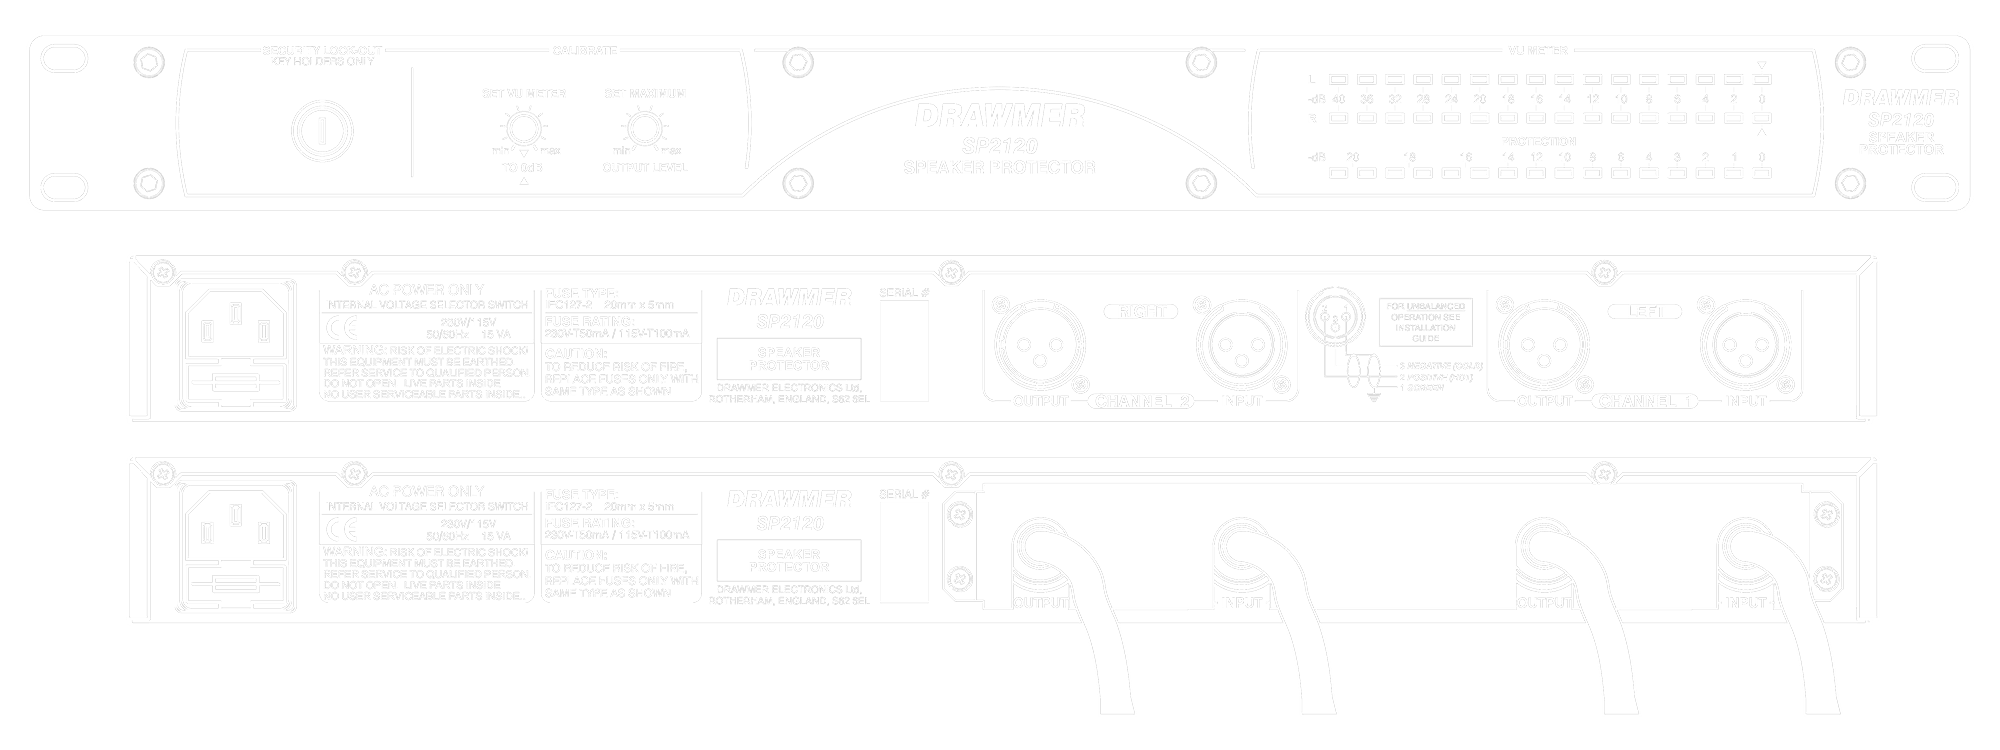 A line drawing of the front and rear panels of the SL22 showing controls and connectors